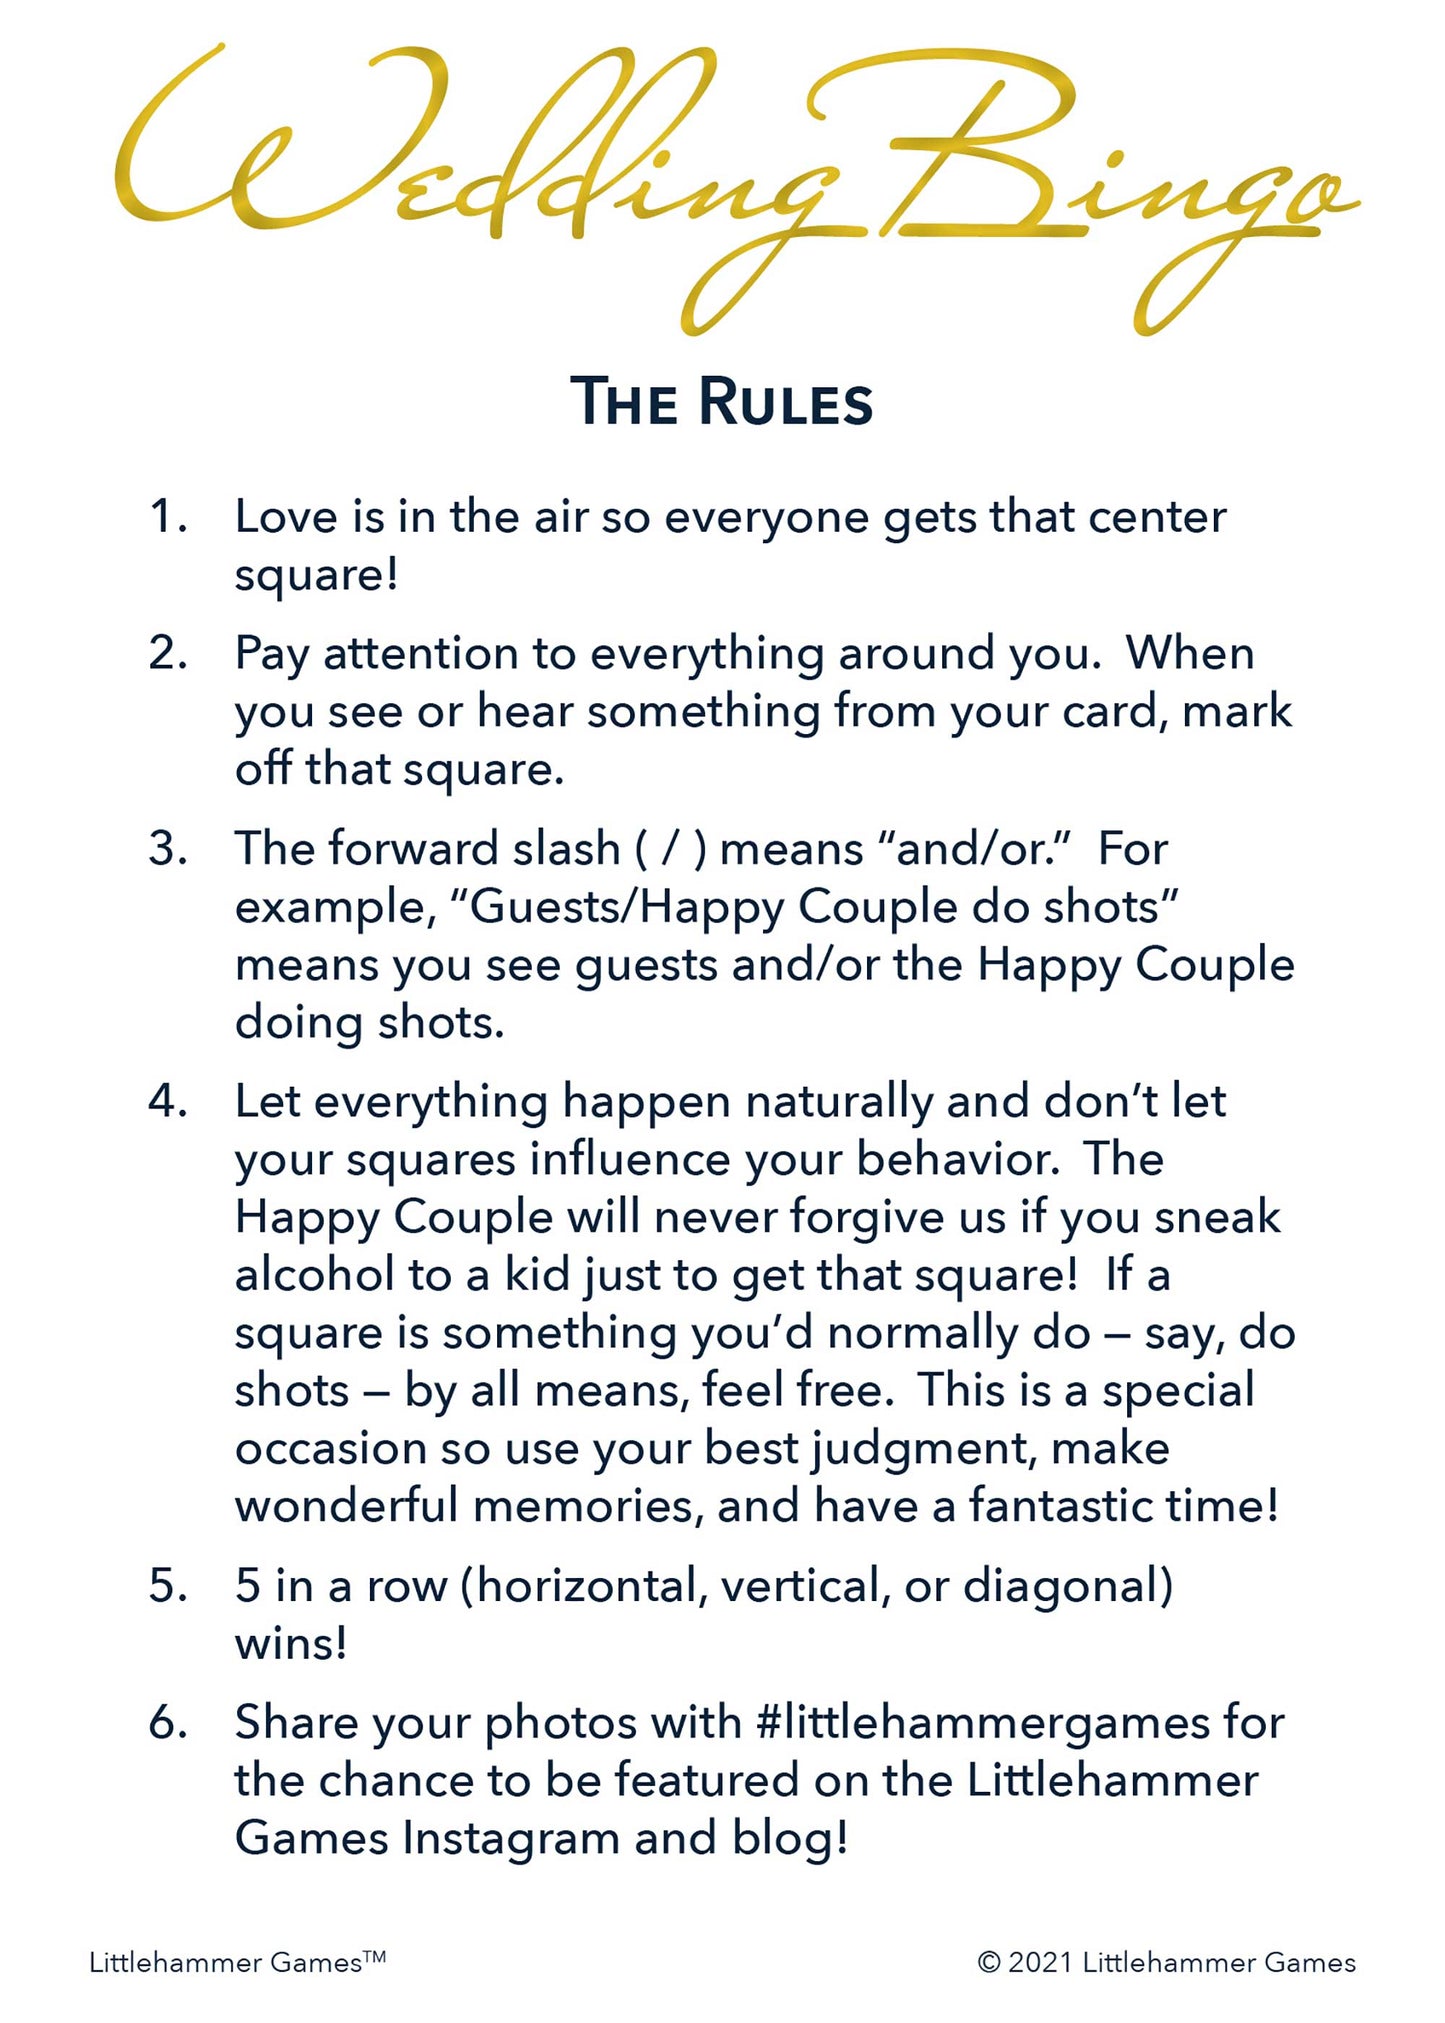 Wedding Bingo rules card on a gold and white background